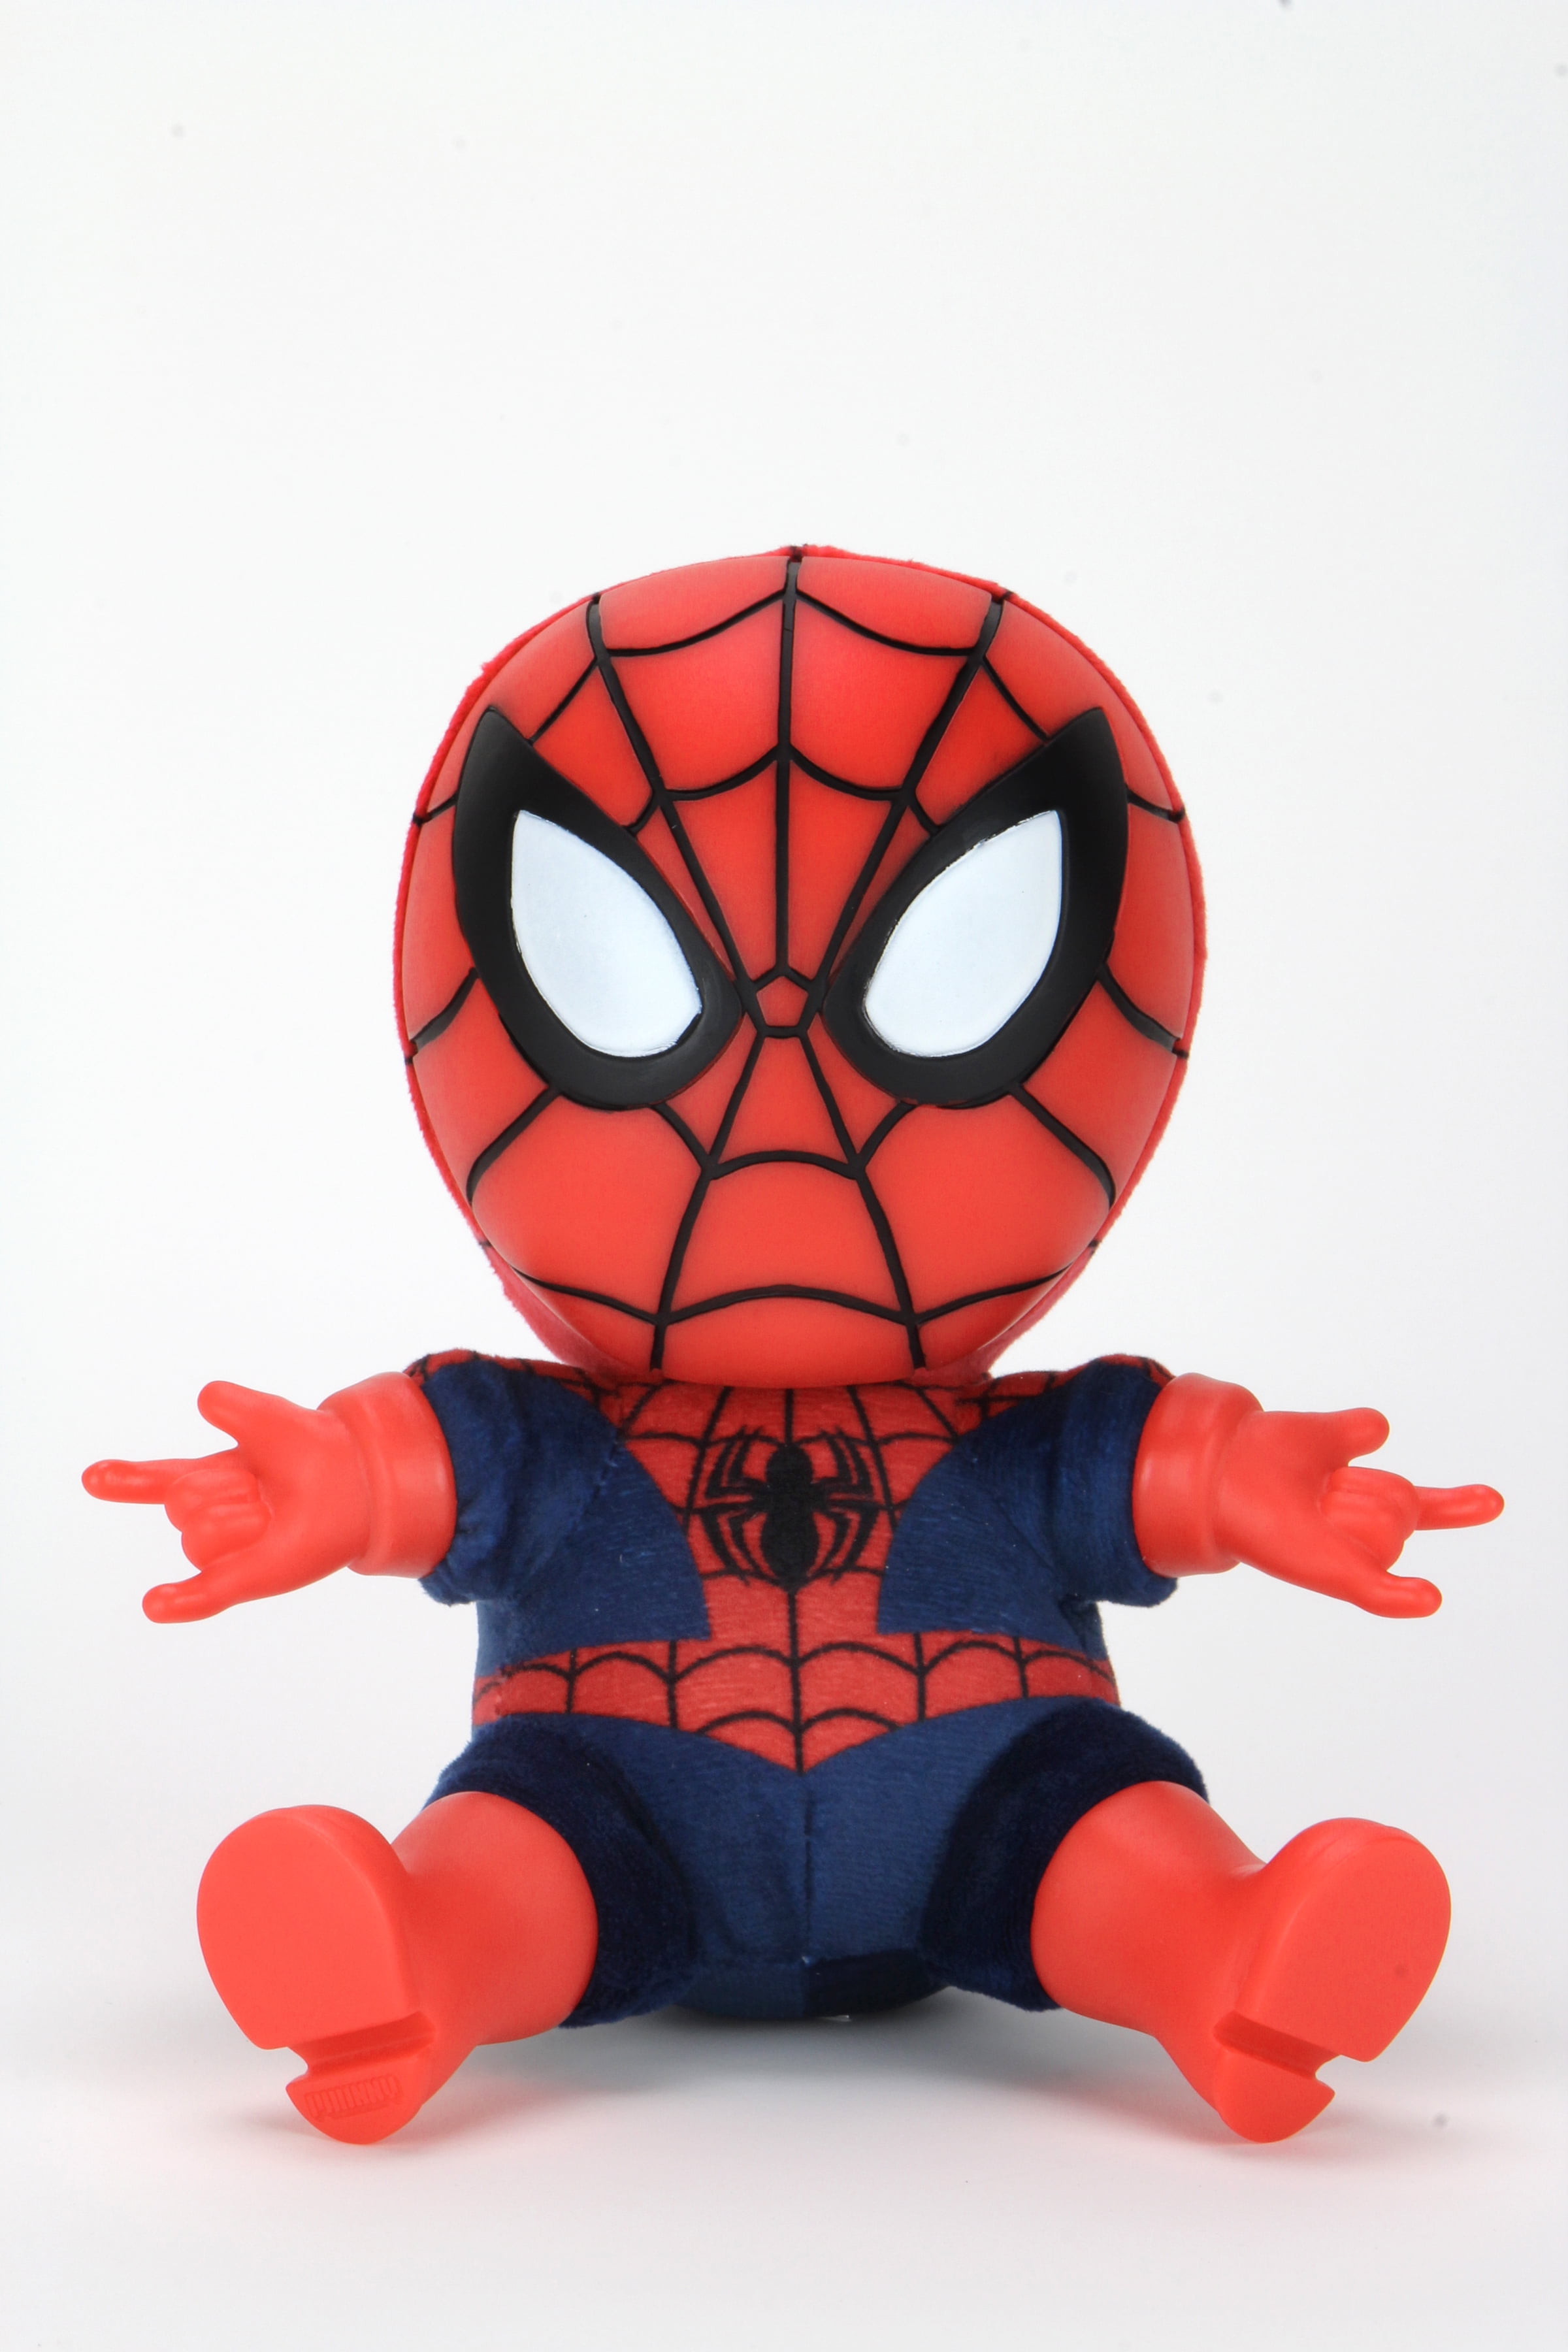 Details about   Marvel Spiderman Avengers Infinity War Spider-Man Action Figure Toy Model Hot 